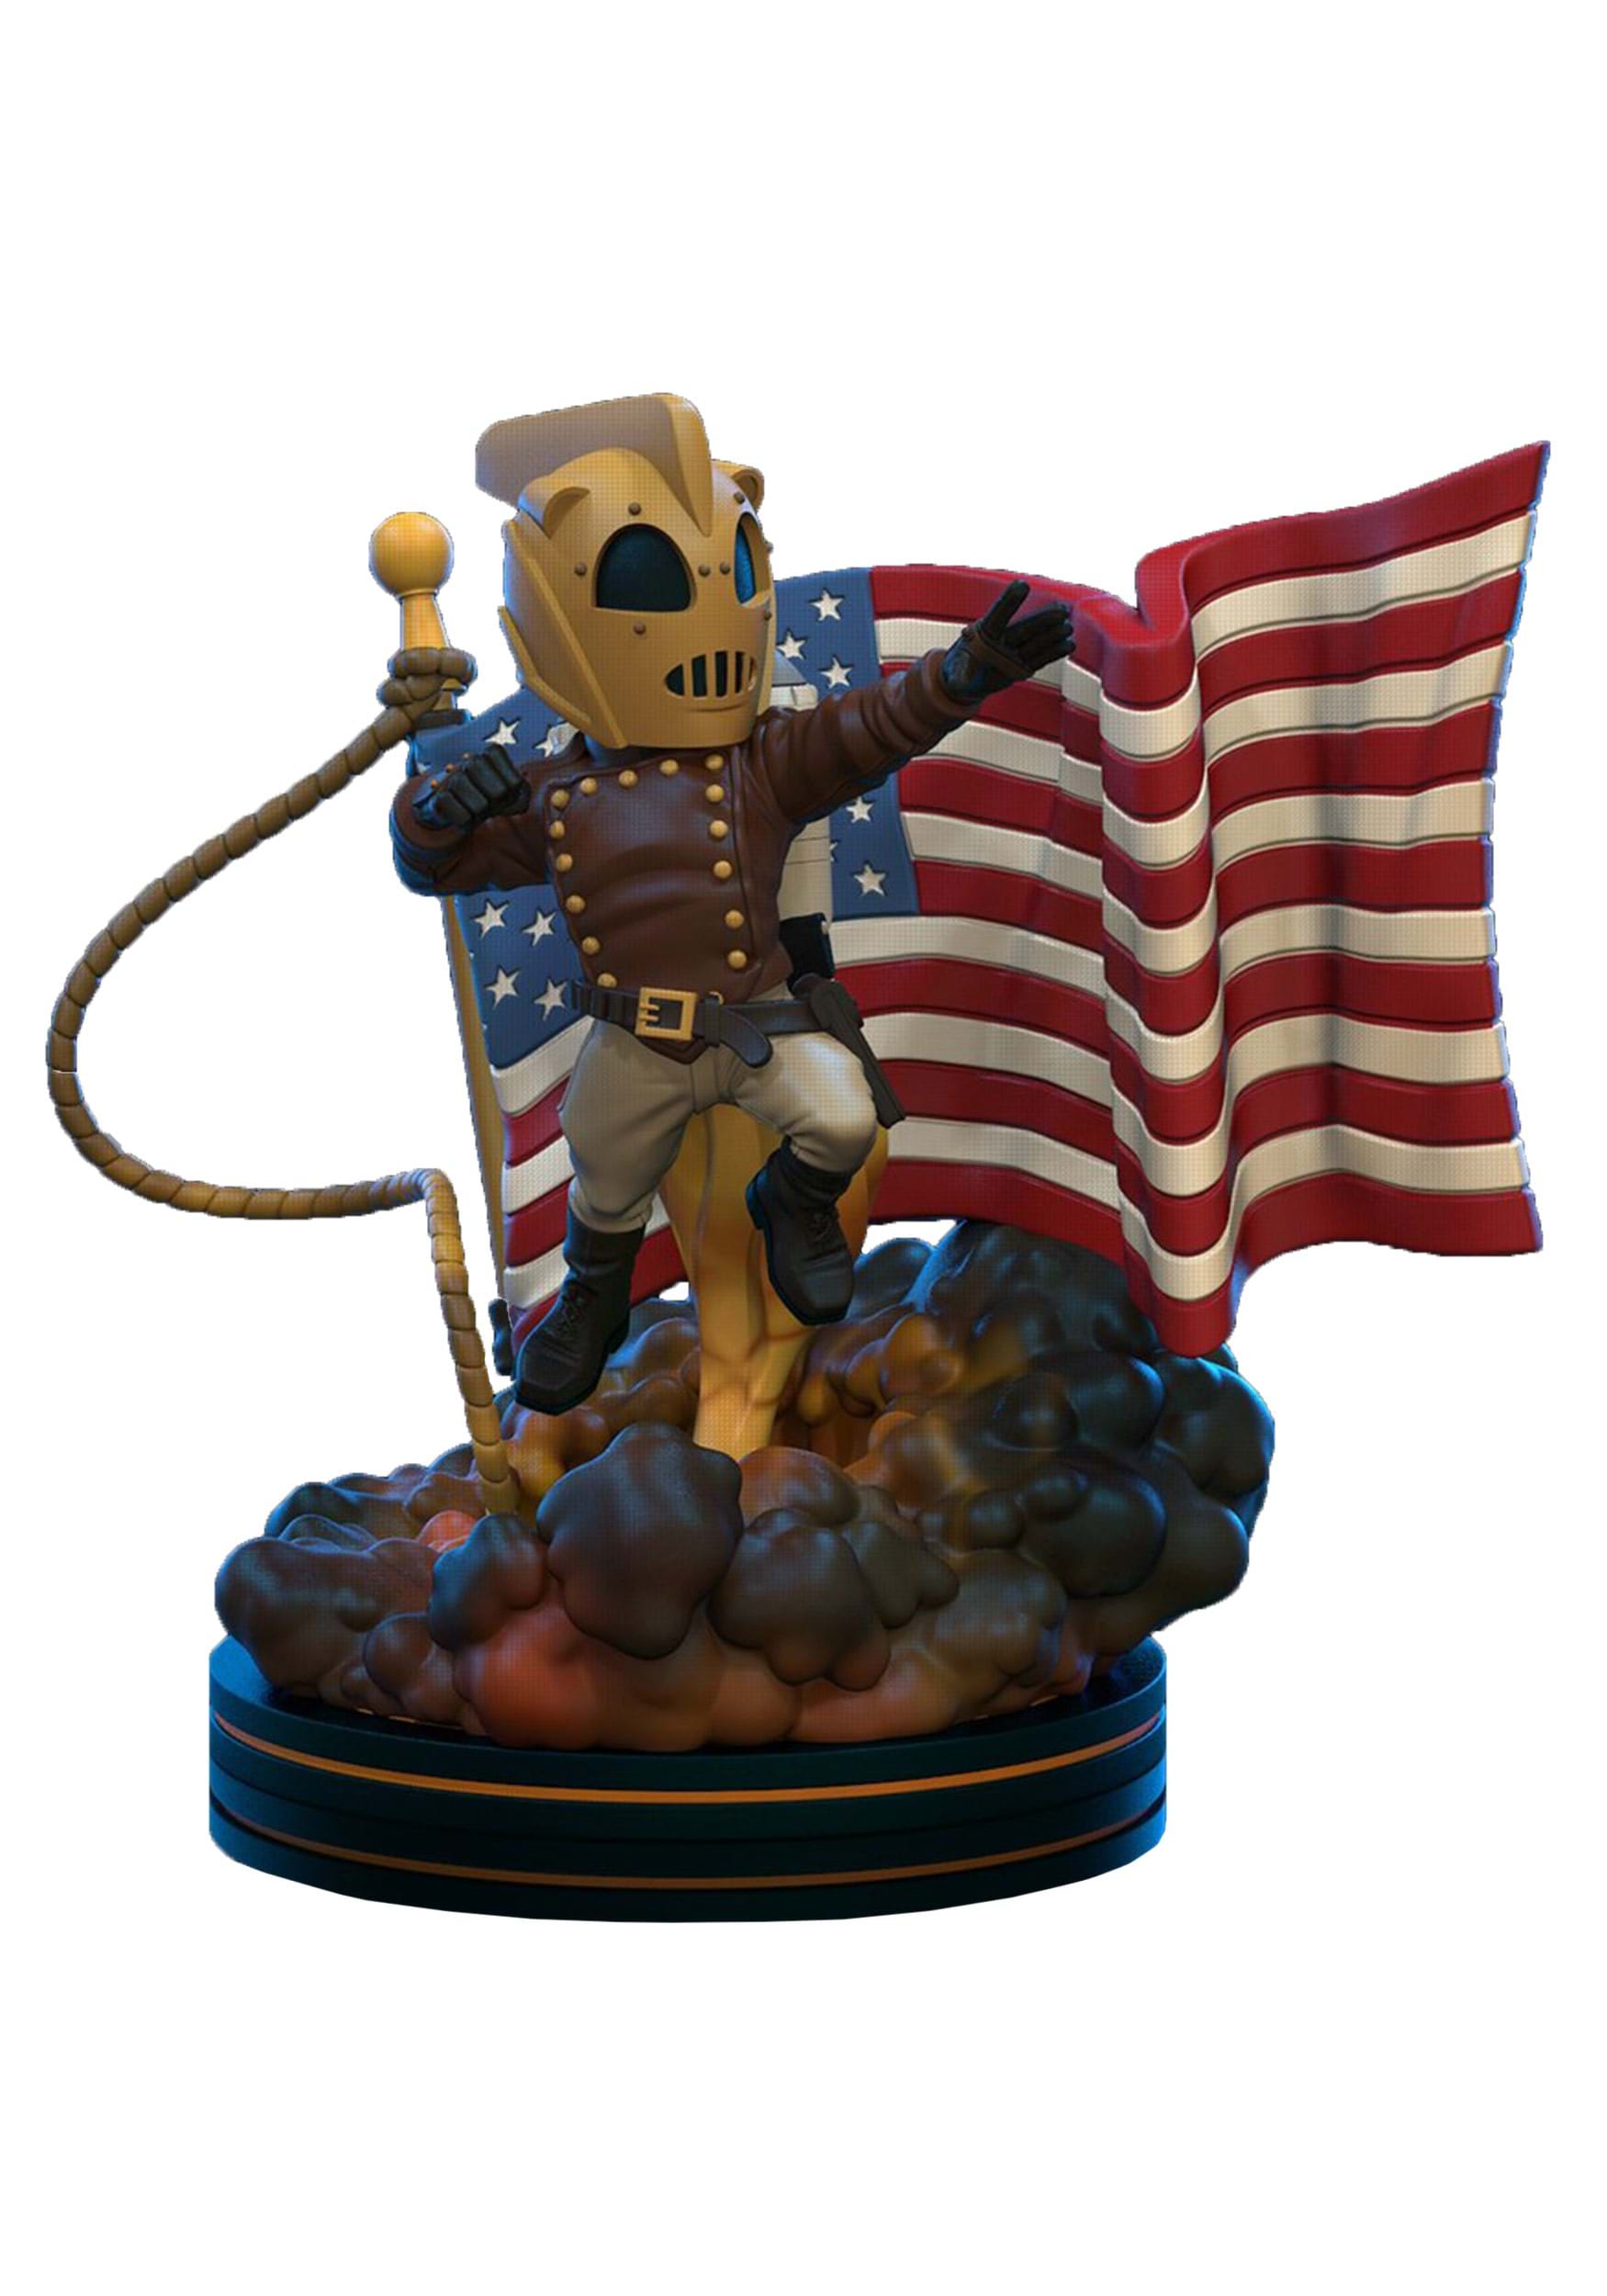 Disney The Rocketeer Q-Fig Statue | Disney Collectibles